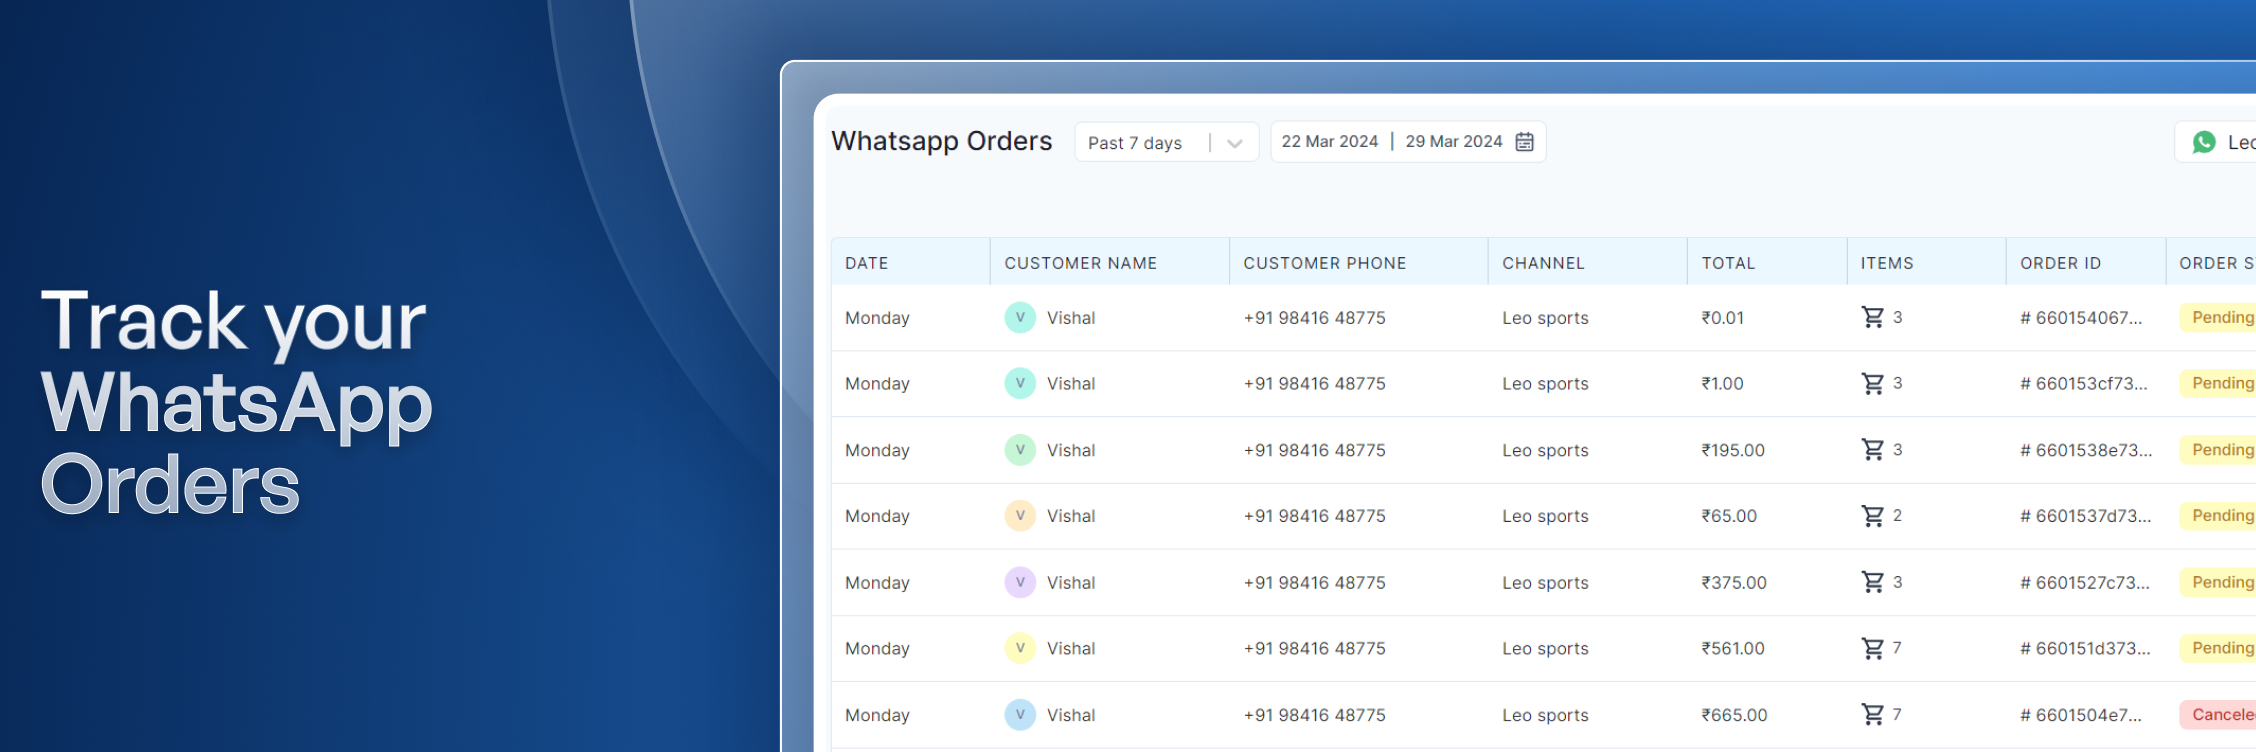 Track your WhatsApp Orders